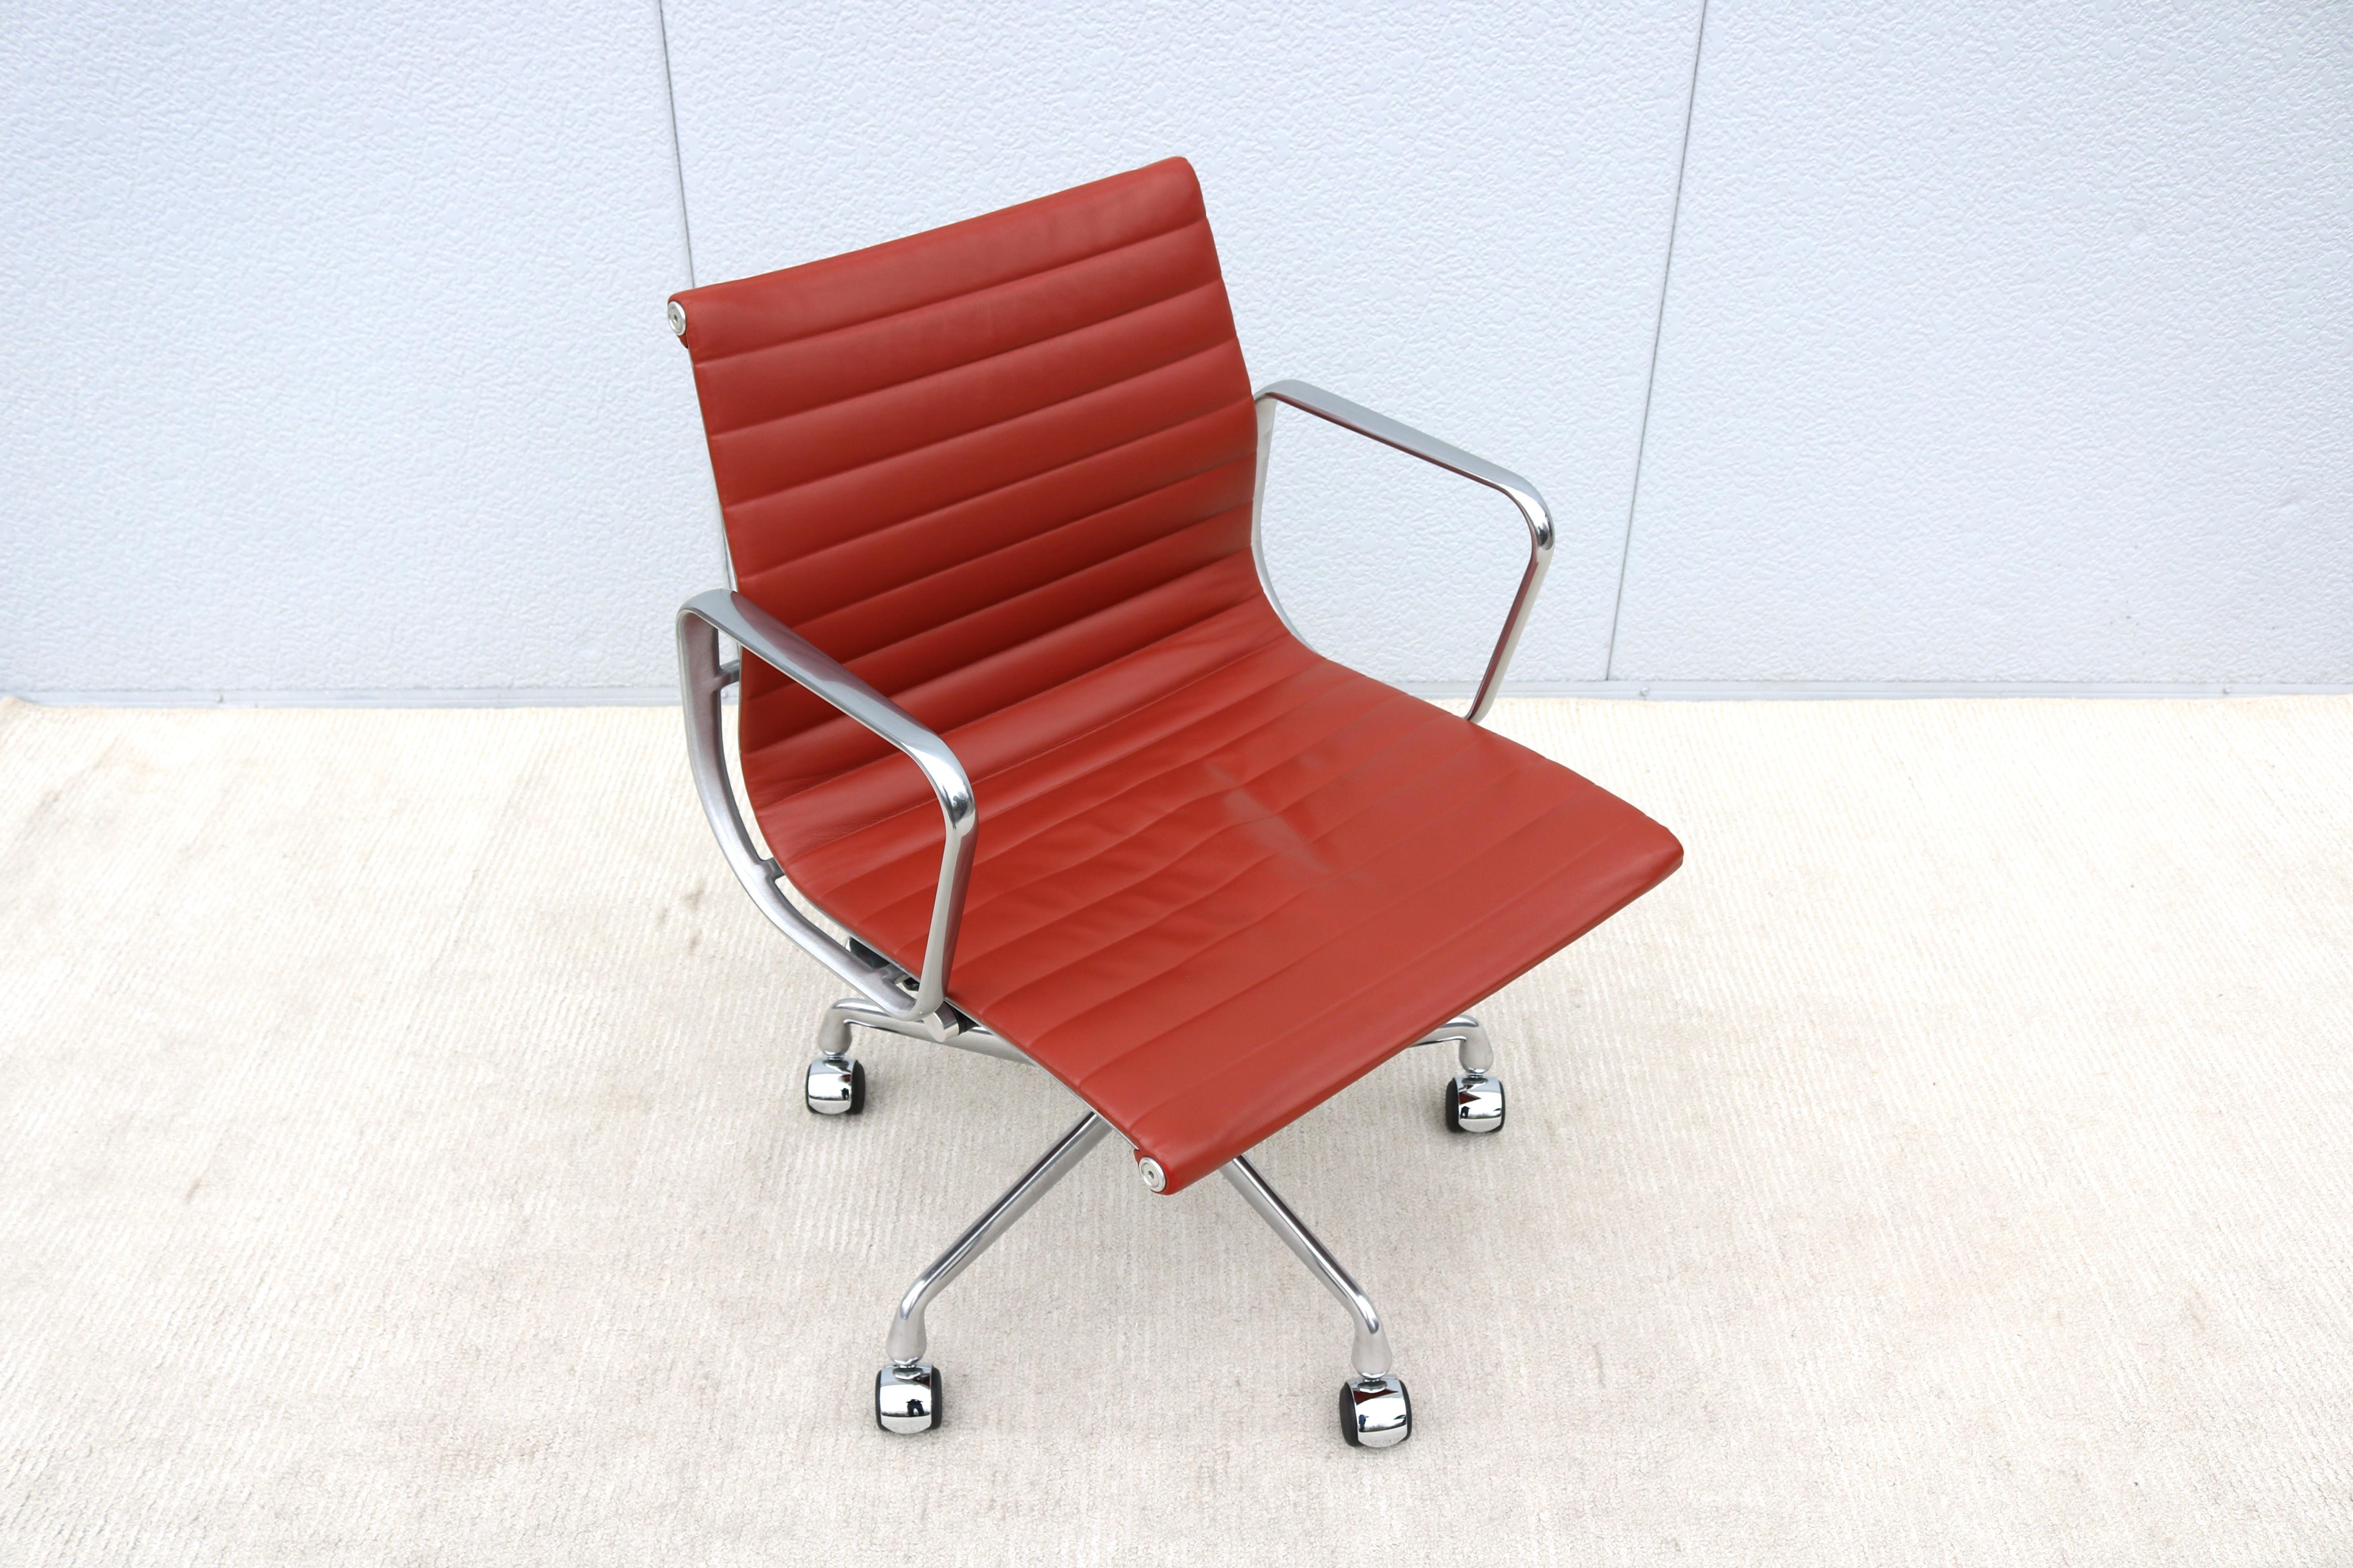 Stunning authentic mid-century modern Eames aluminum group management chair.
A timeless design classic and contemporary with innovative comfort features.
One of Herman Miller most popular chairs was designed in 1958 by Charles and Ray Eames.

These